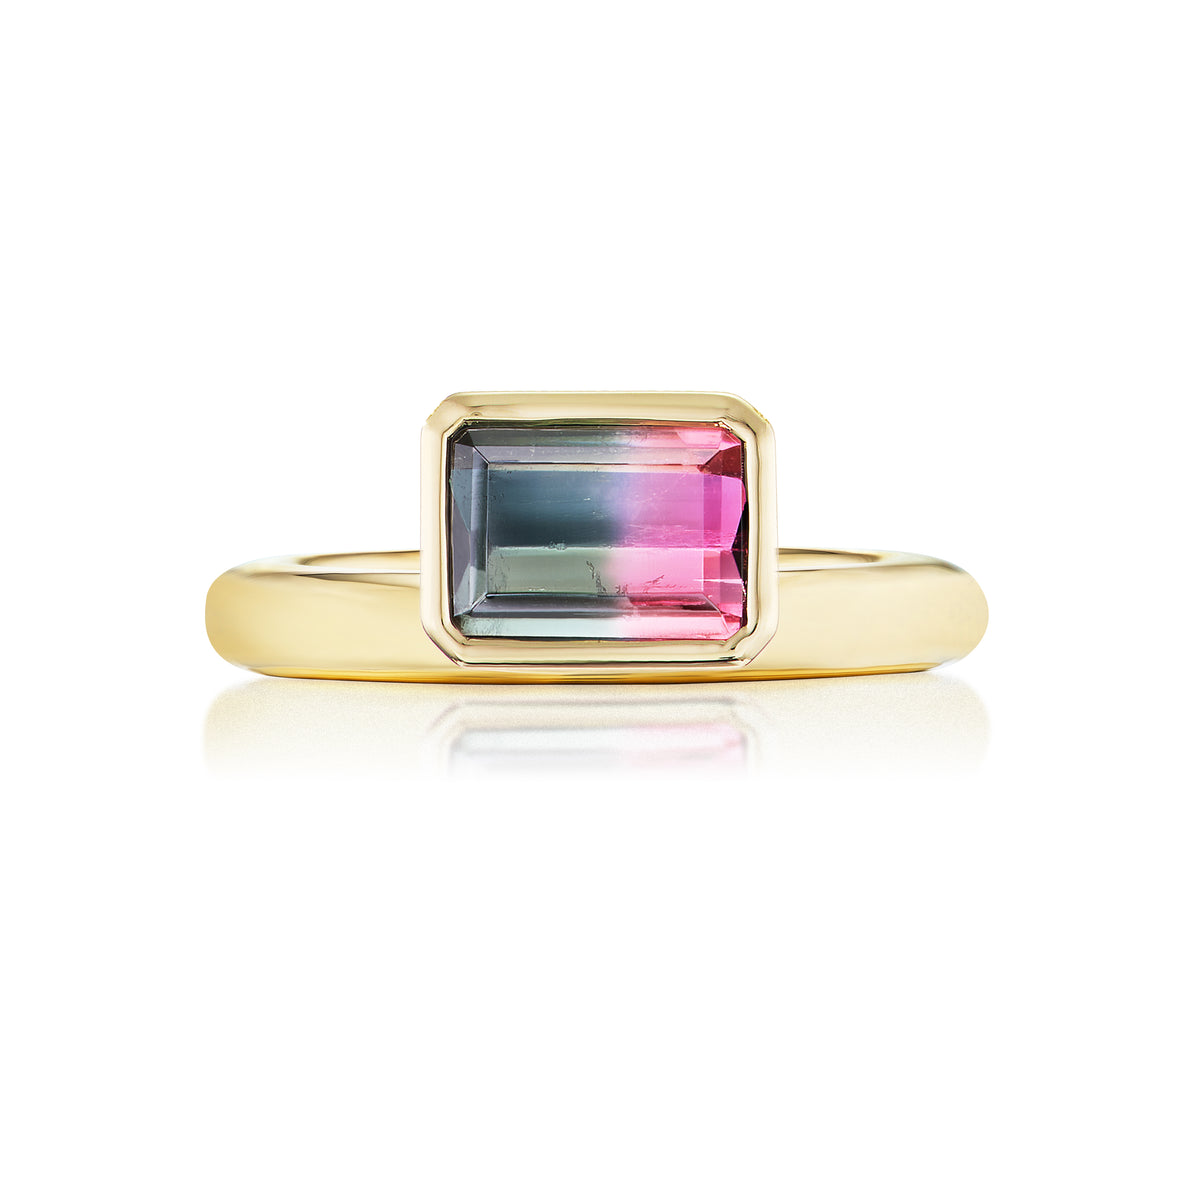 Pinky Ring in Yellow Gold with Emerald Cut Watermelon Tourmaline